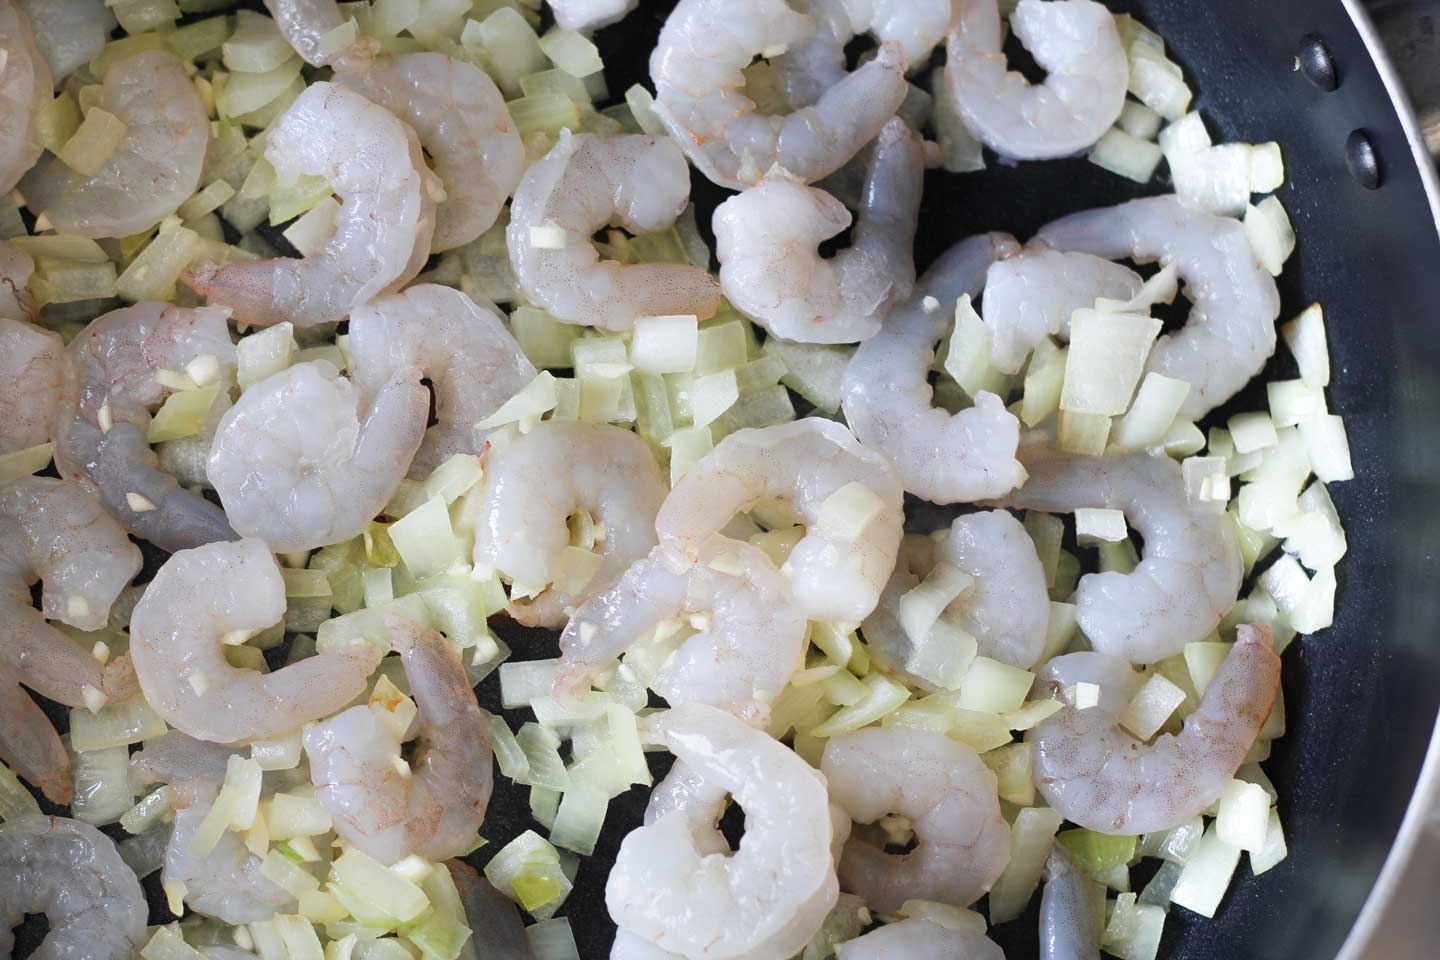 Thawed shrimp in a black skillet with chopped onions, just beginning to cook.